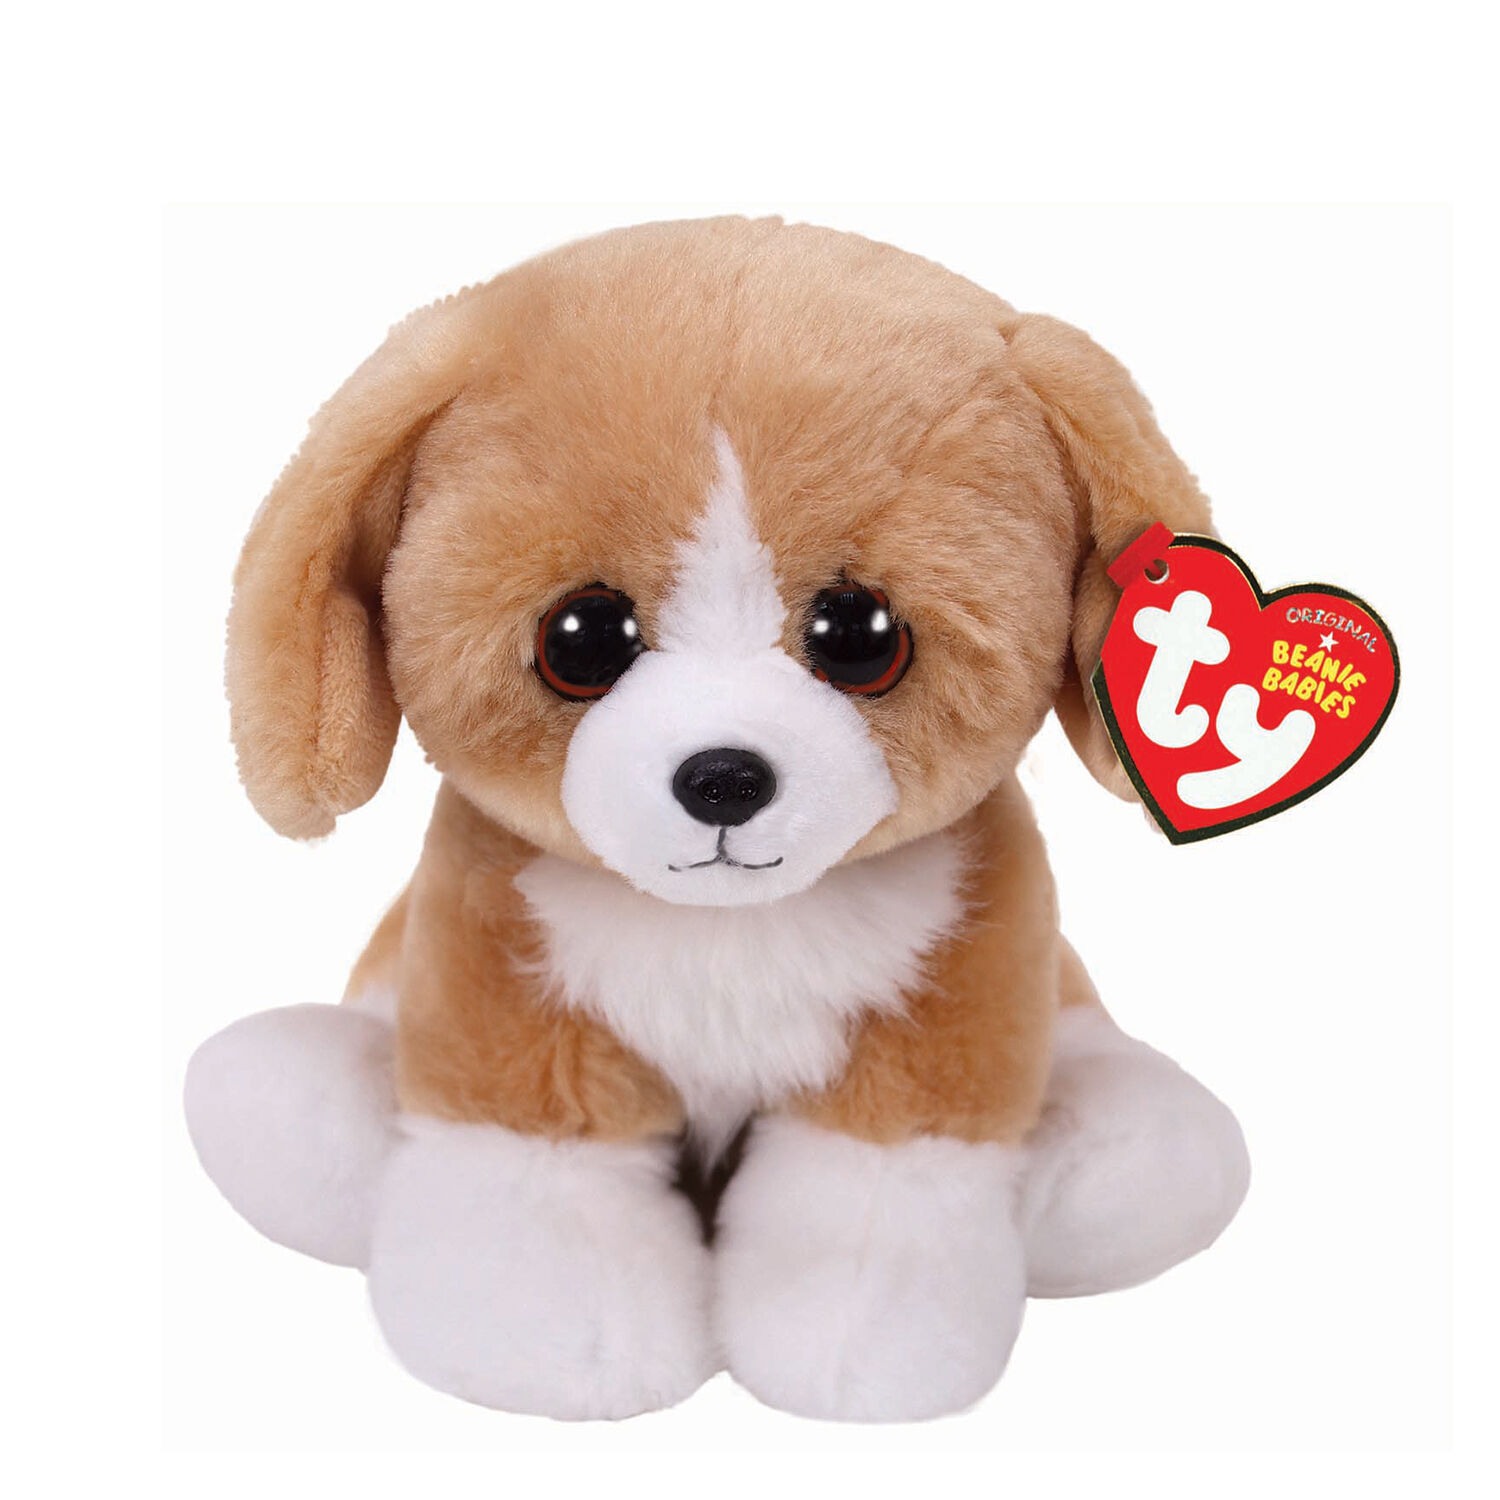 beanie babies age appropriate